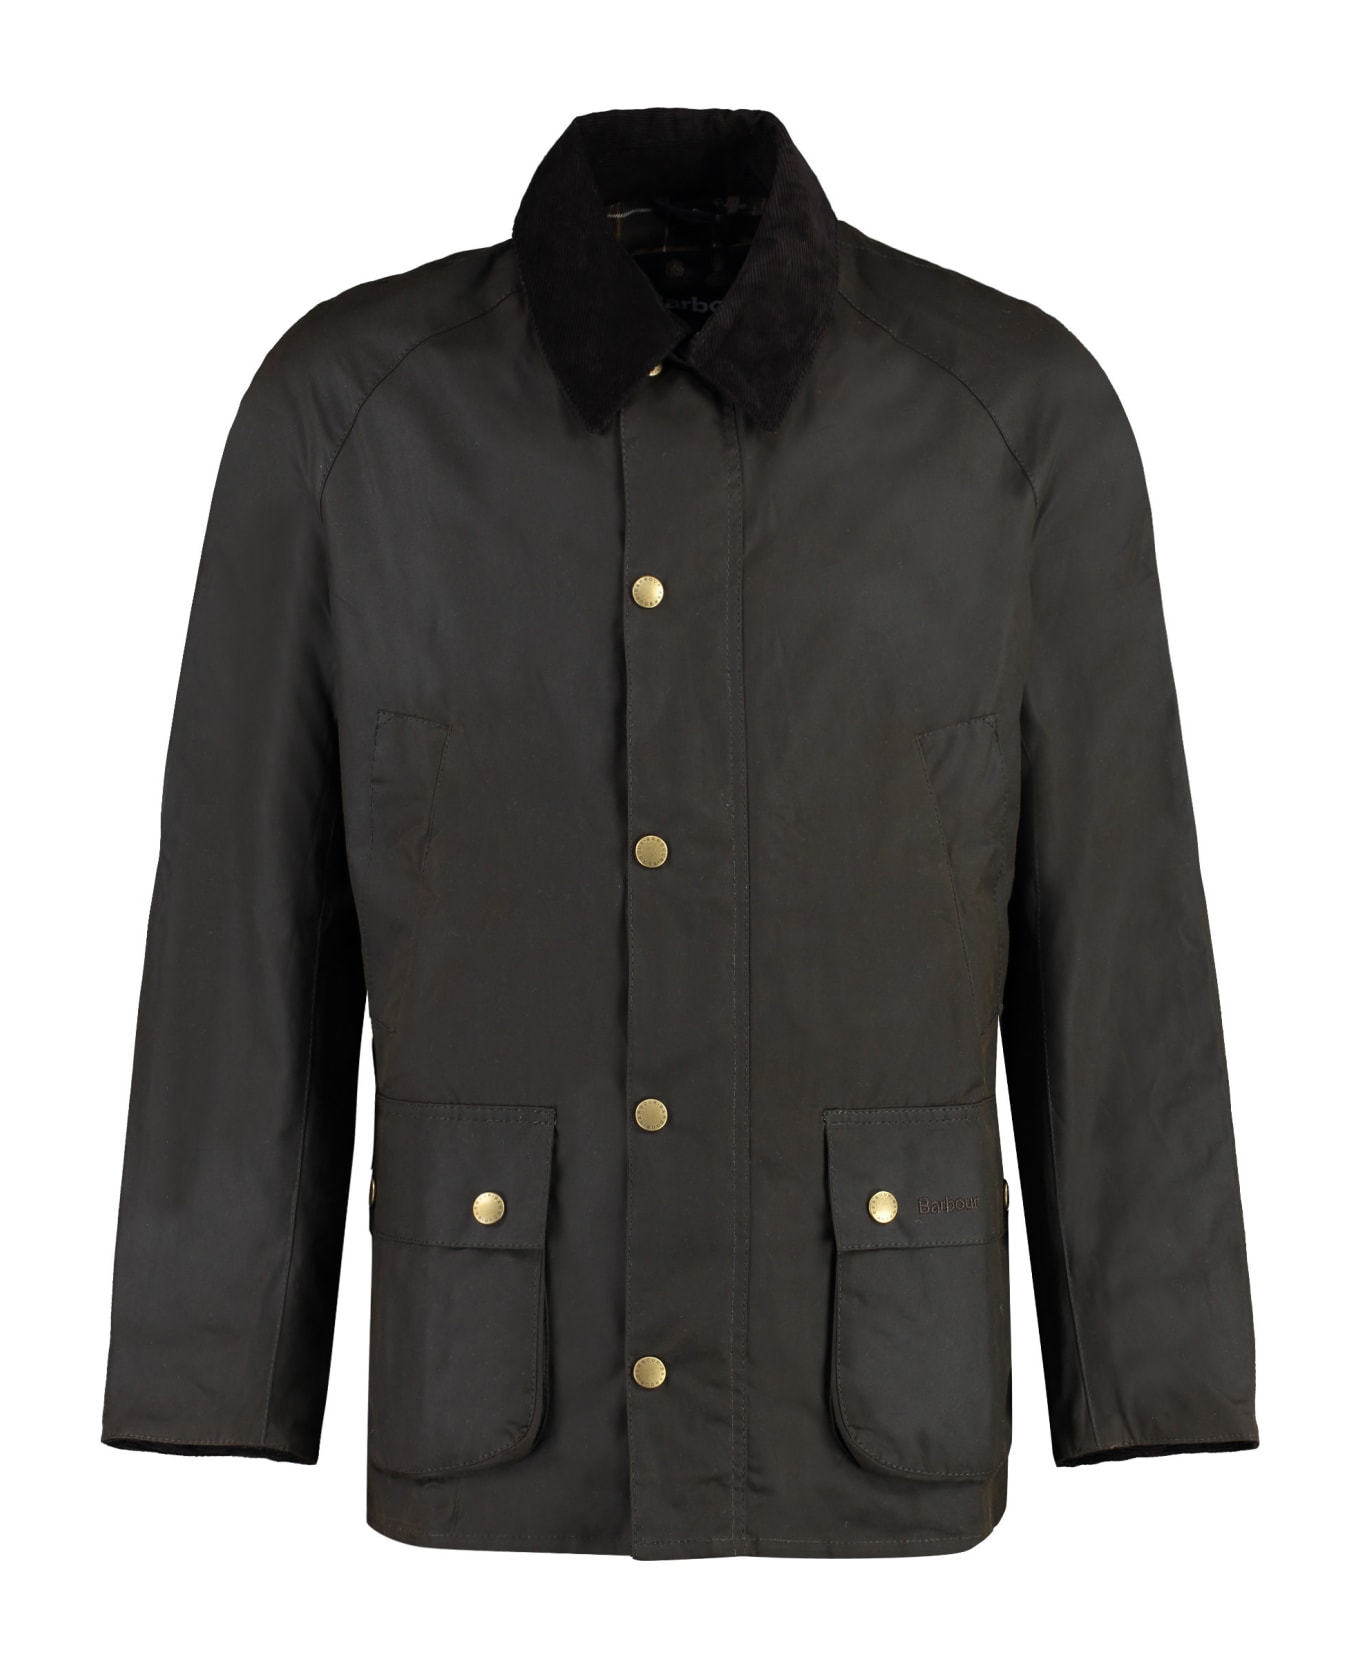 Barbour Ashby Waxed Cotton Jacket - green